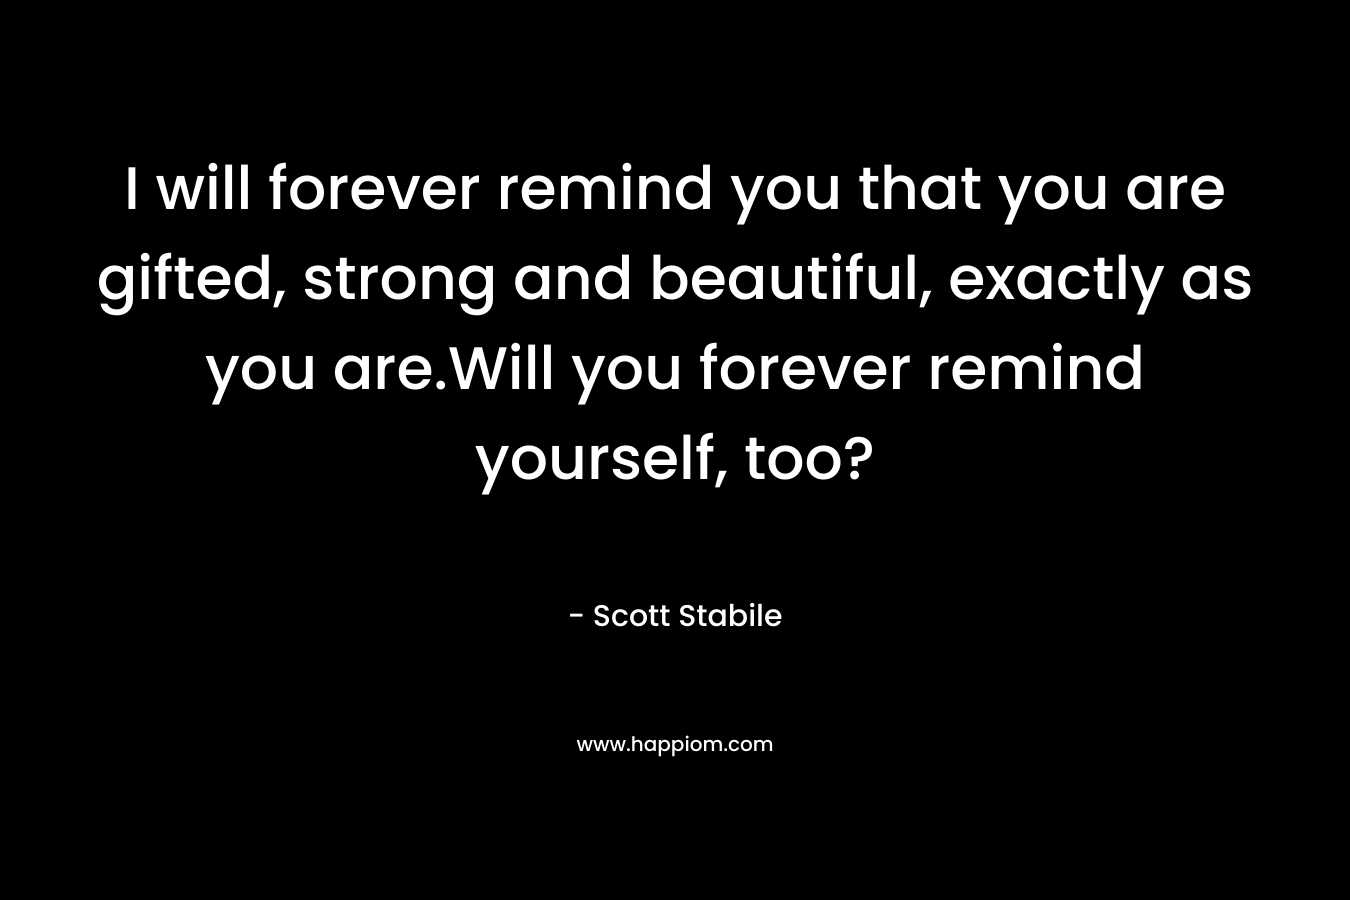 I will forever remind you that you are gifted, strong and beautiful, exactly as you are.Will you forever remind yourself, too? – Scott Stabile